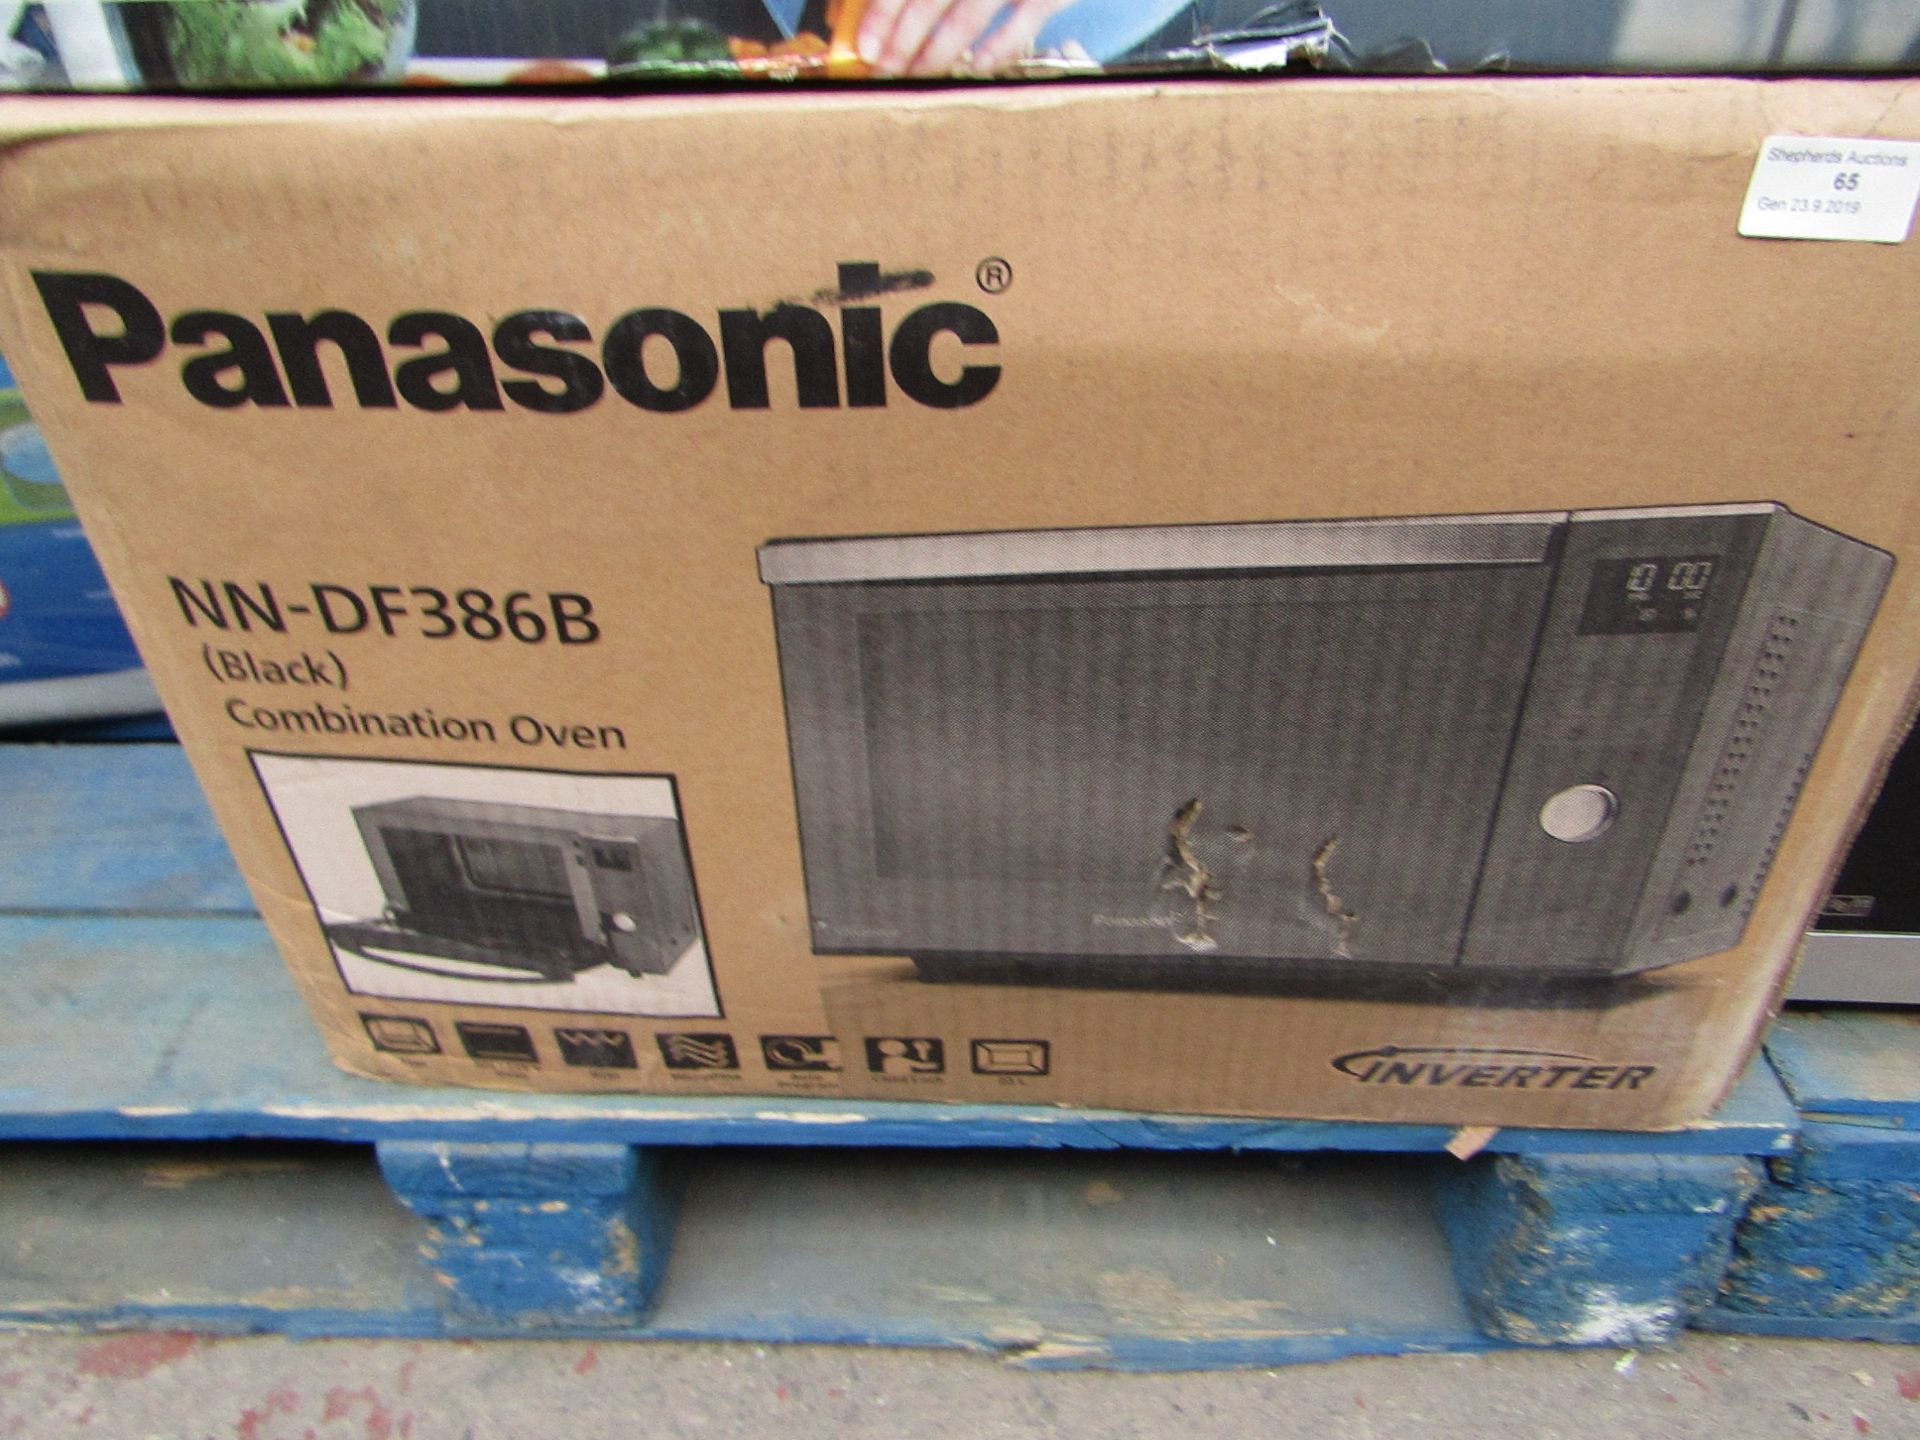 Panasonic Combination Oven.Boxed but unchecked